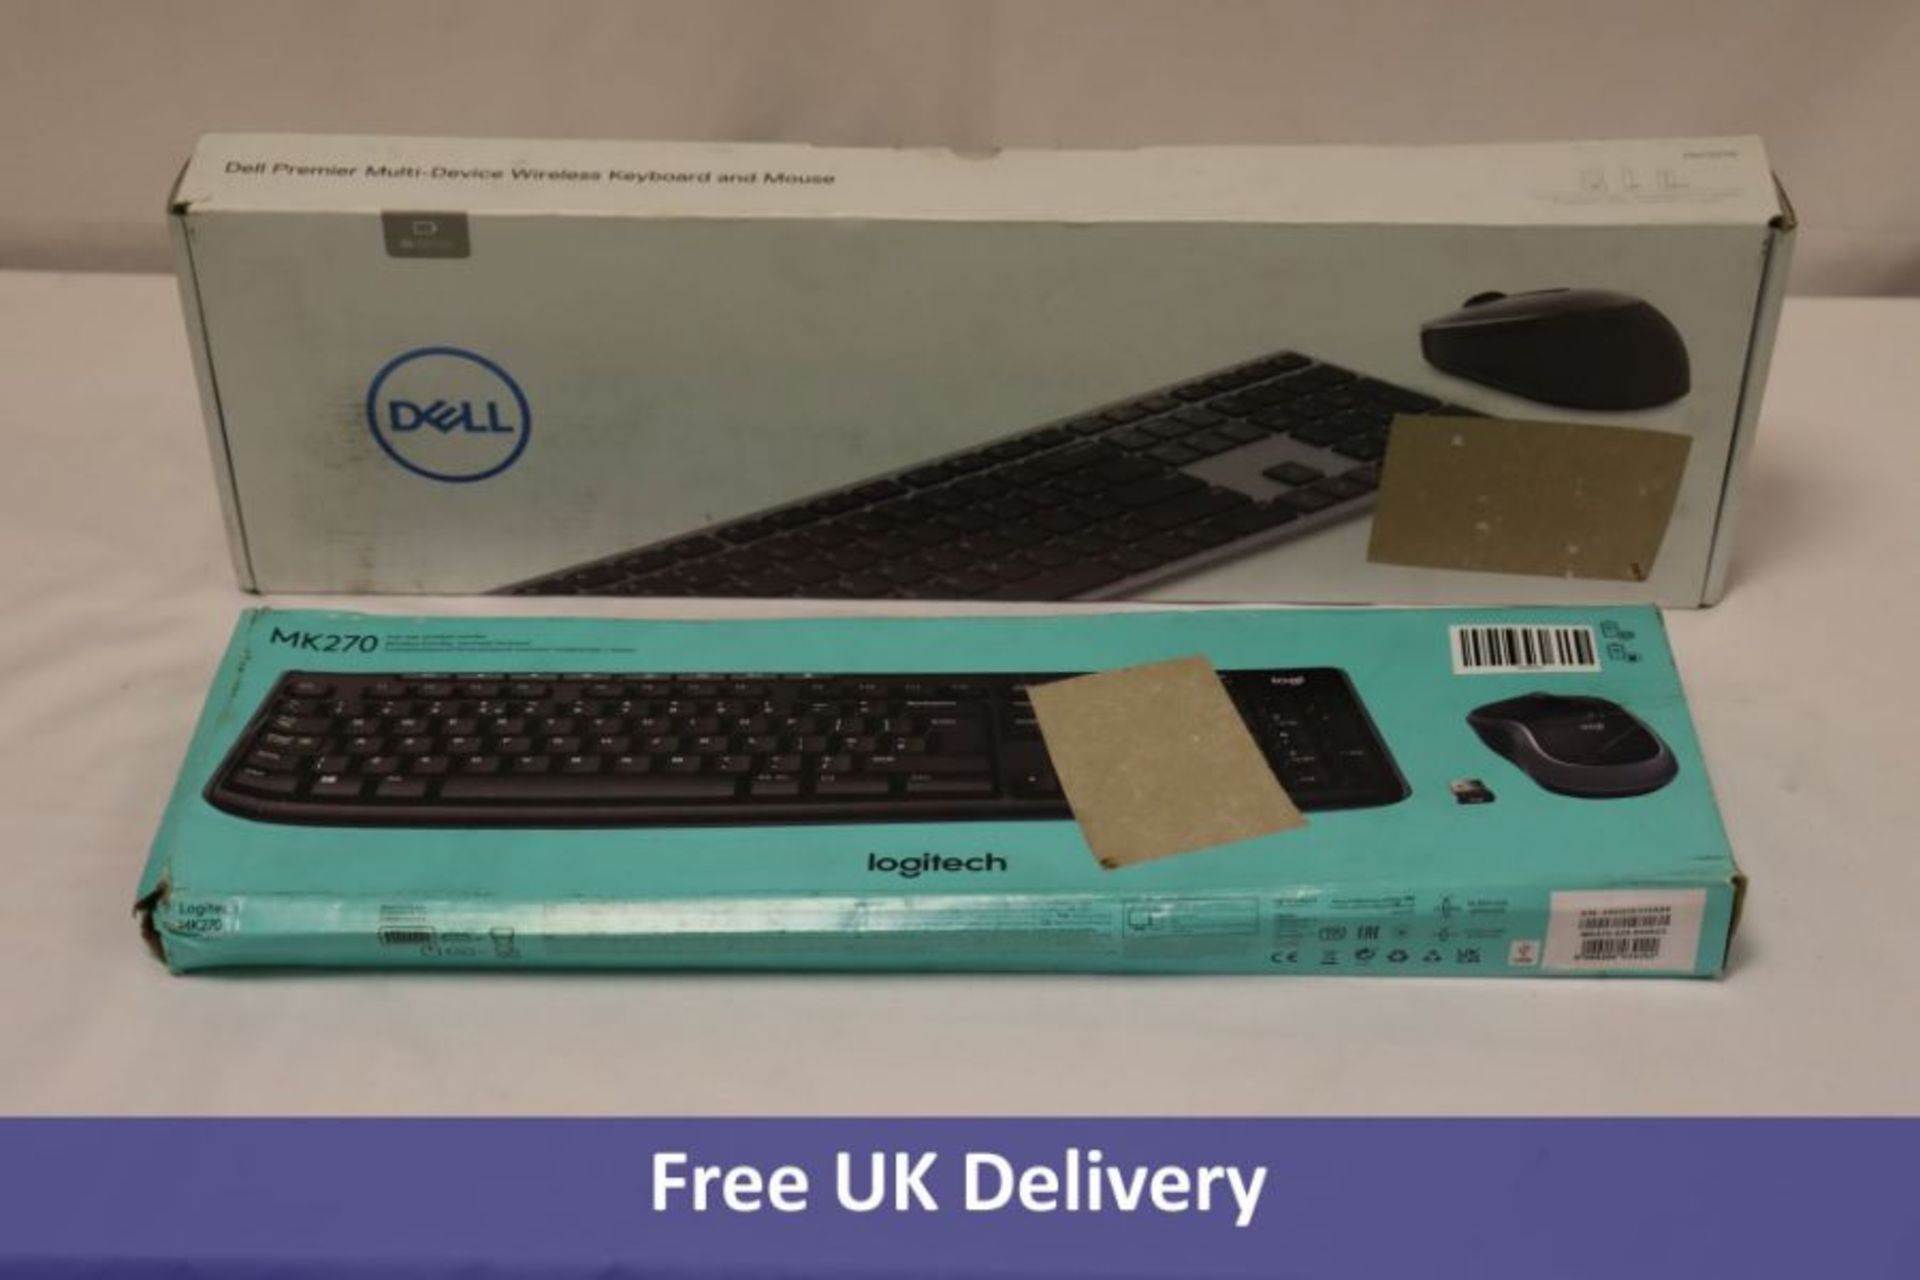 Two Keyboard and Mouse Sets to include 1x Dell Premier Multi-Device Wireless, KM7321W, 1x Logitech M